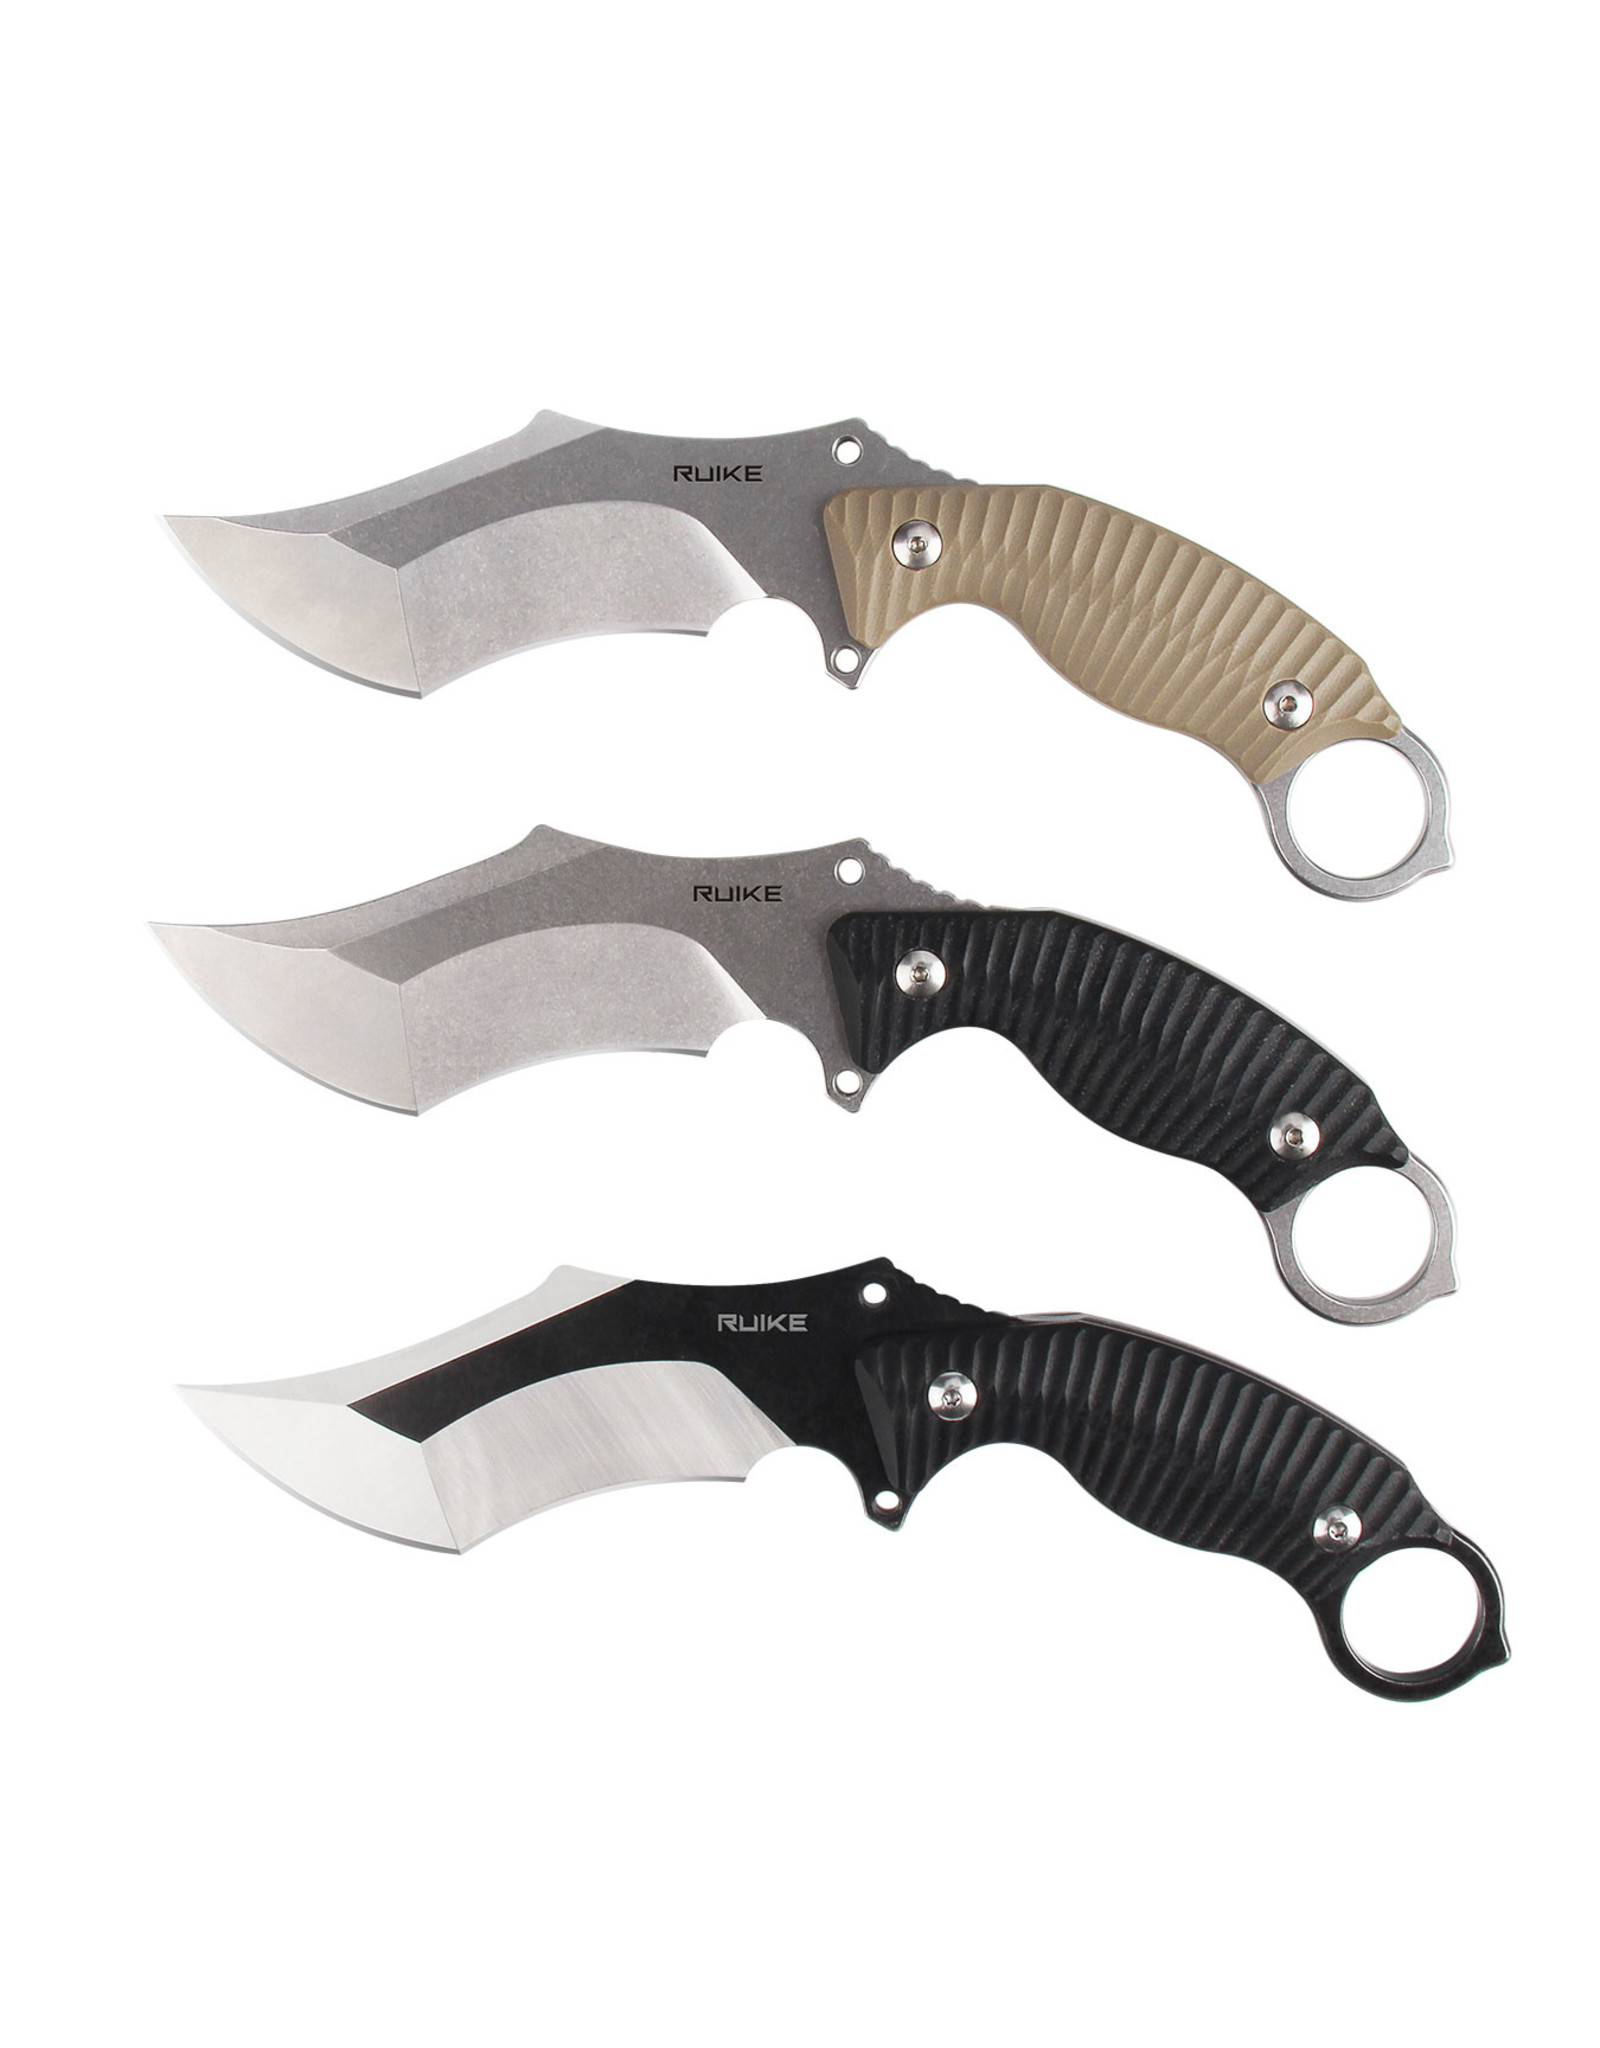 RUIKE KNIVES F181 FIXED BLADE